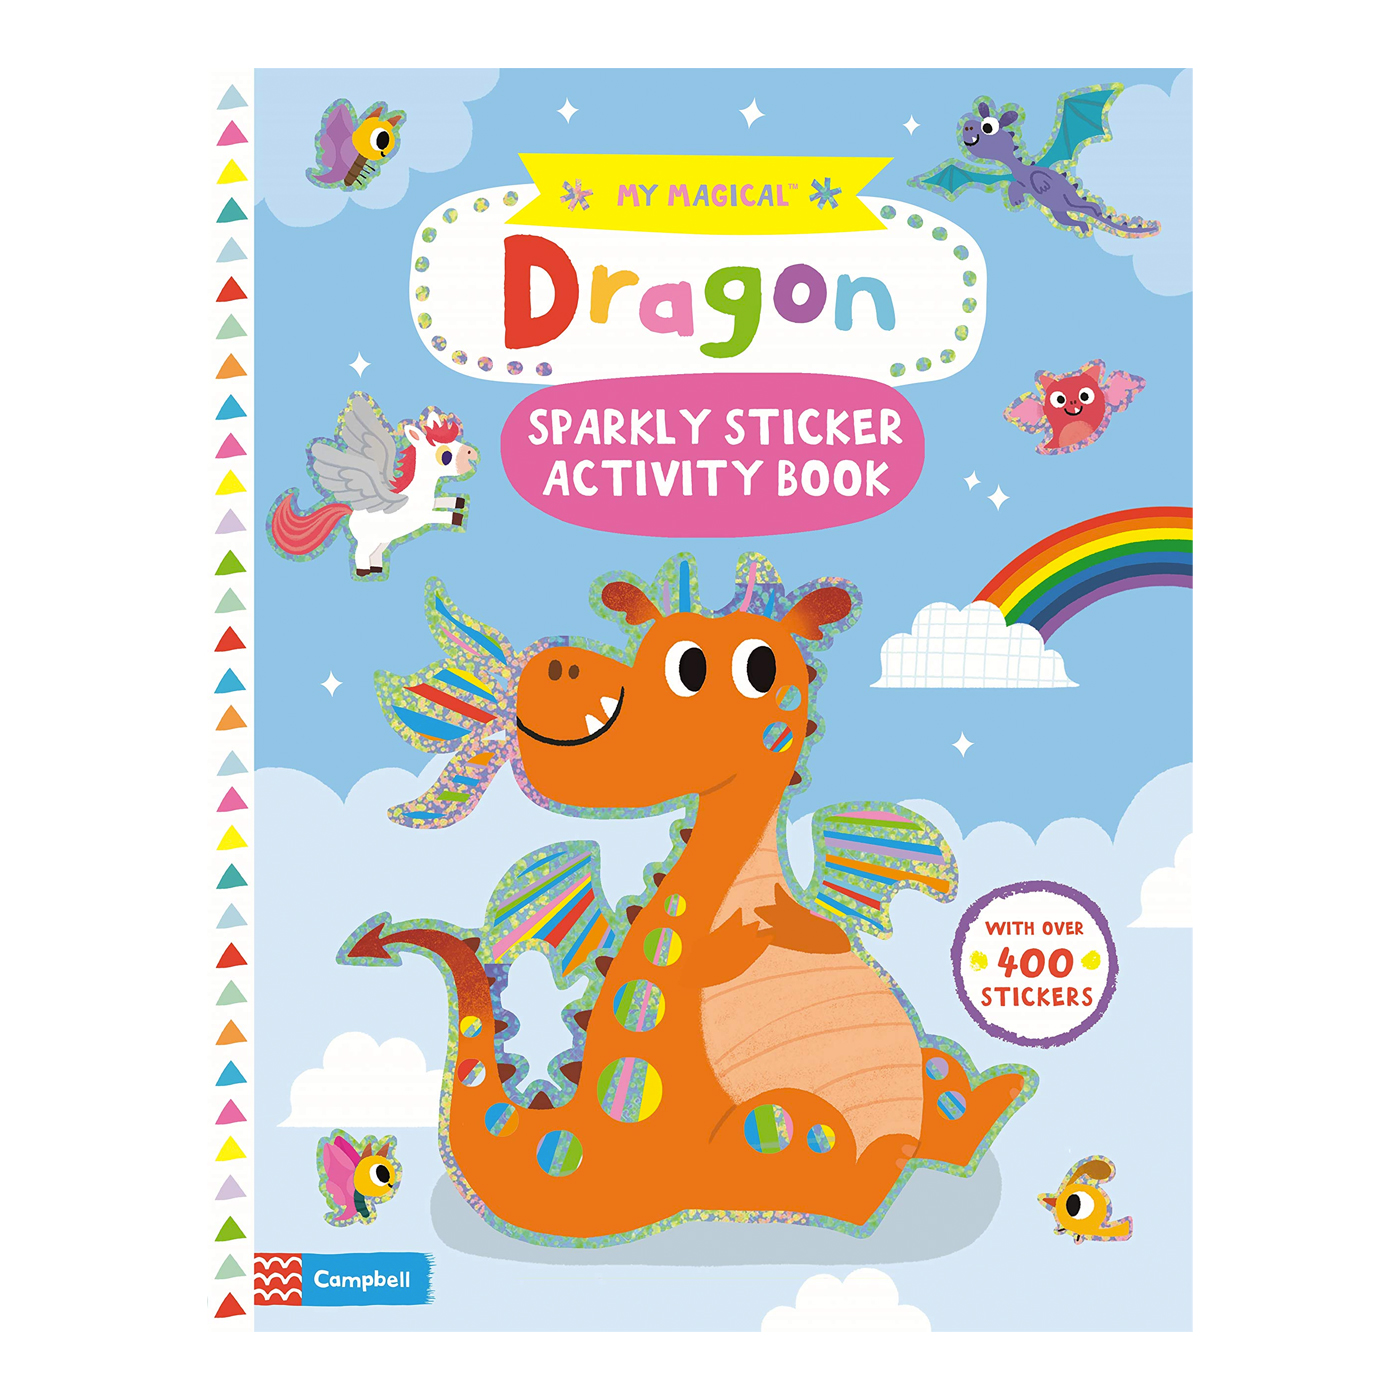  My Magical Dragon Sparkly Sticker Activity Book